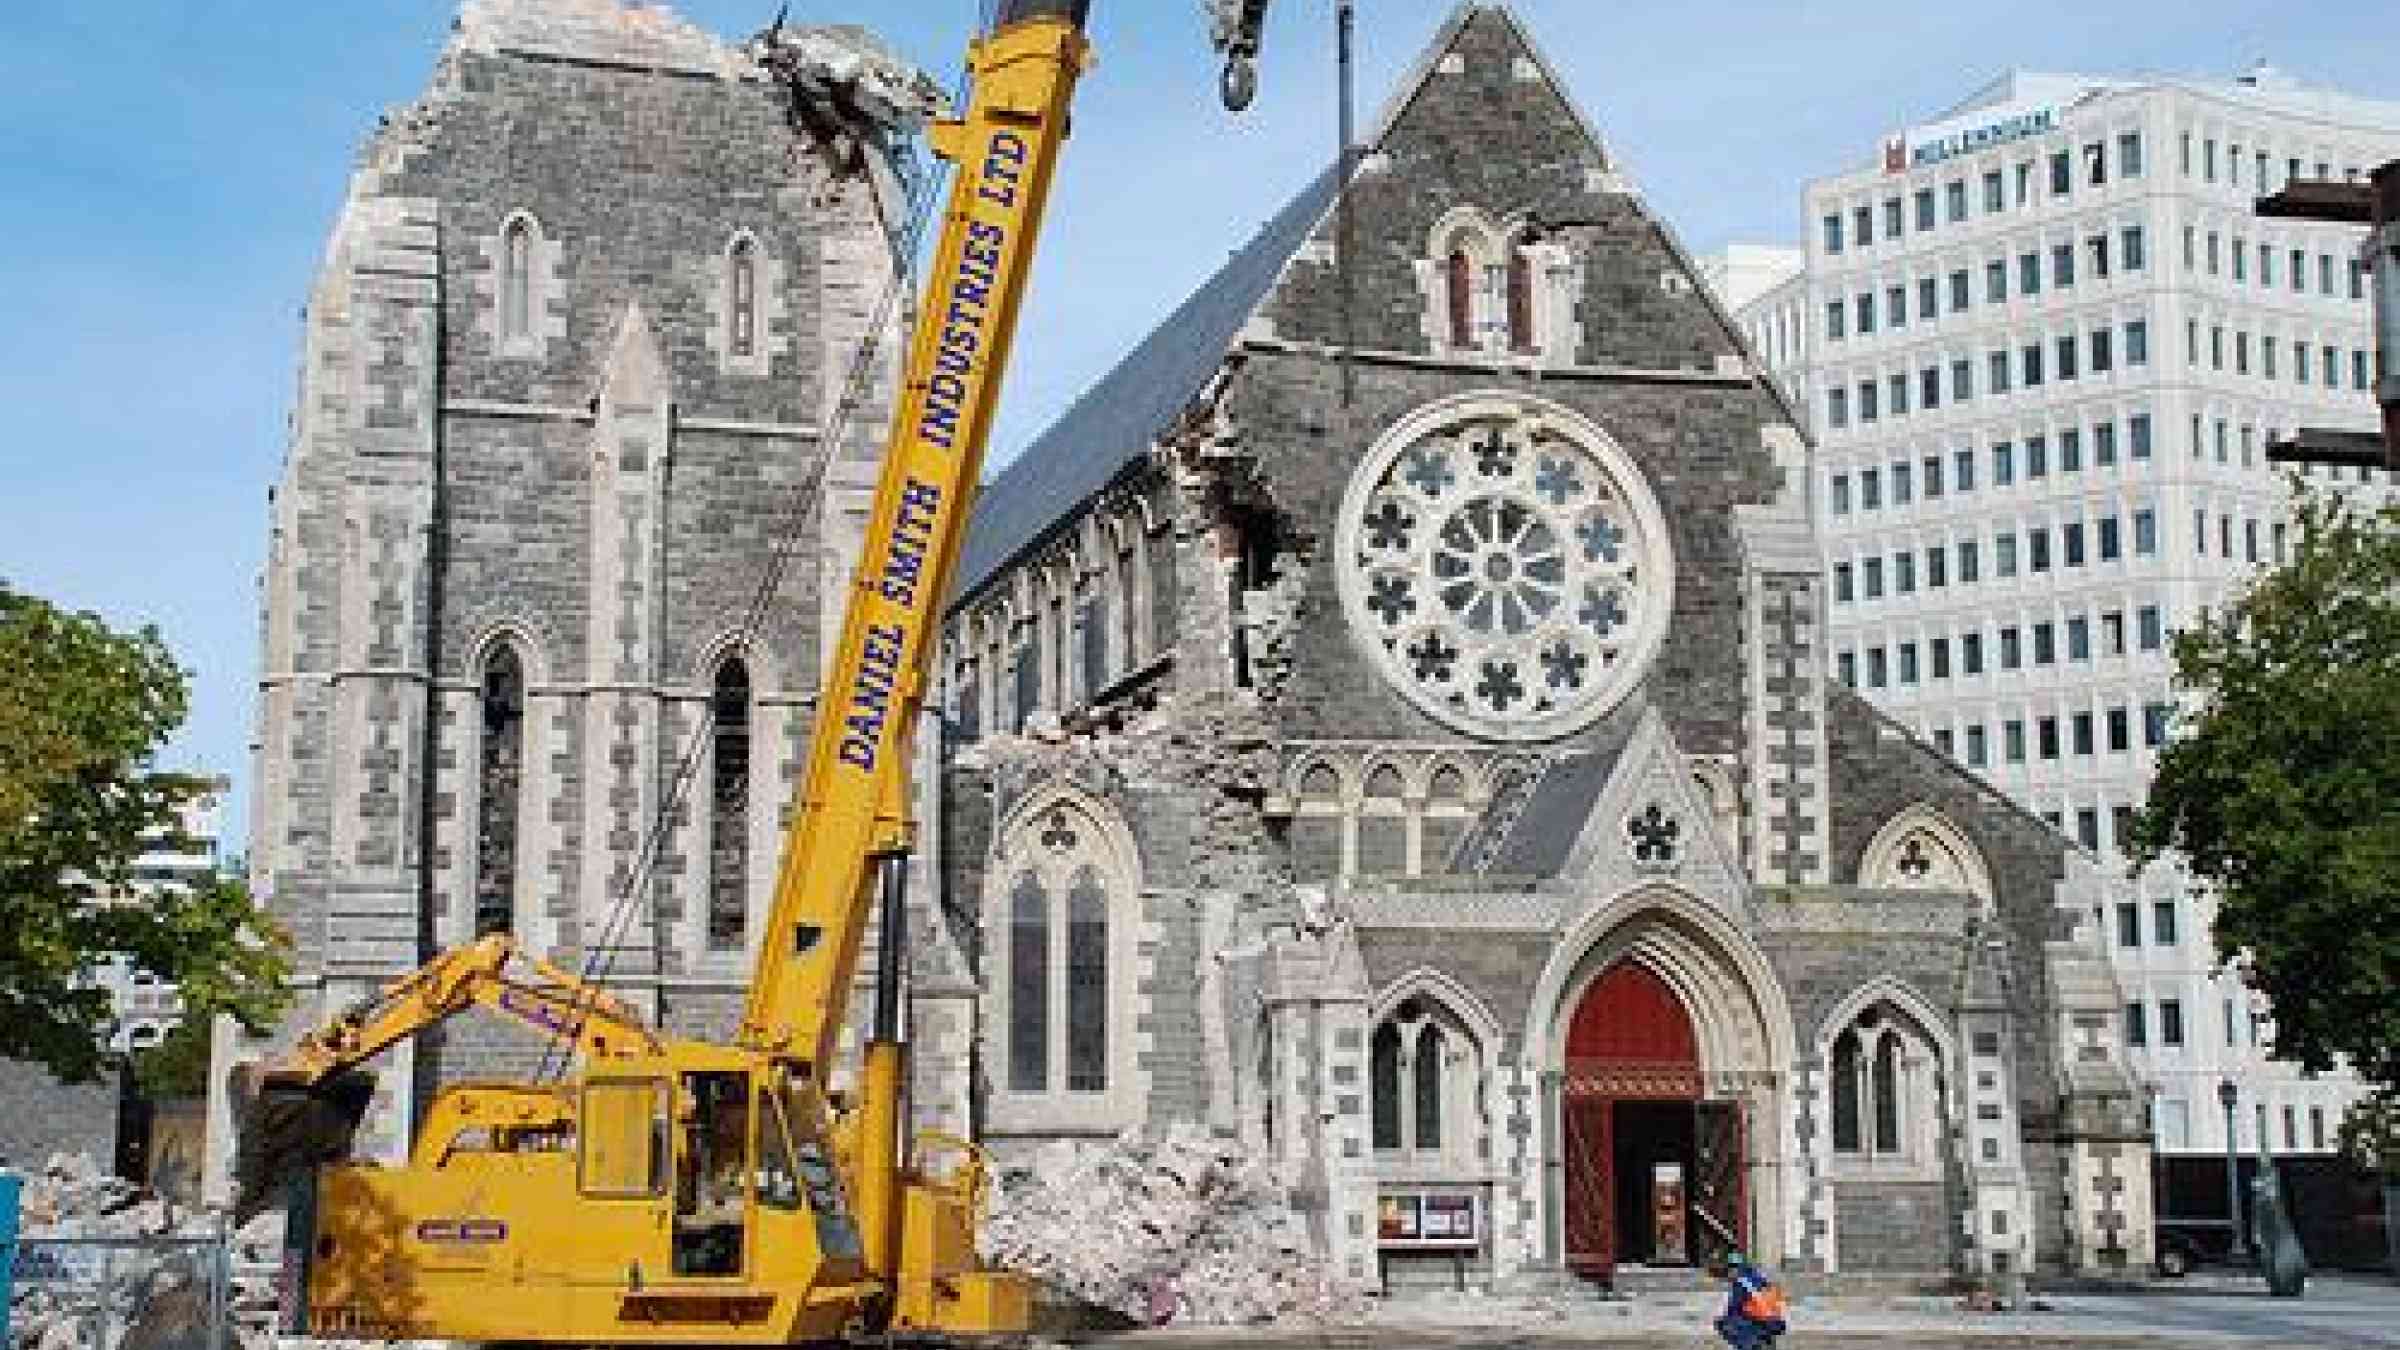 The Christchurch earthquakes highlighted the vital importance of good governance.